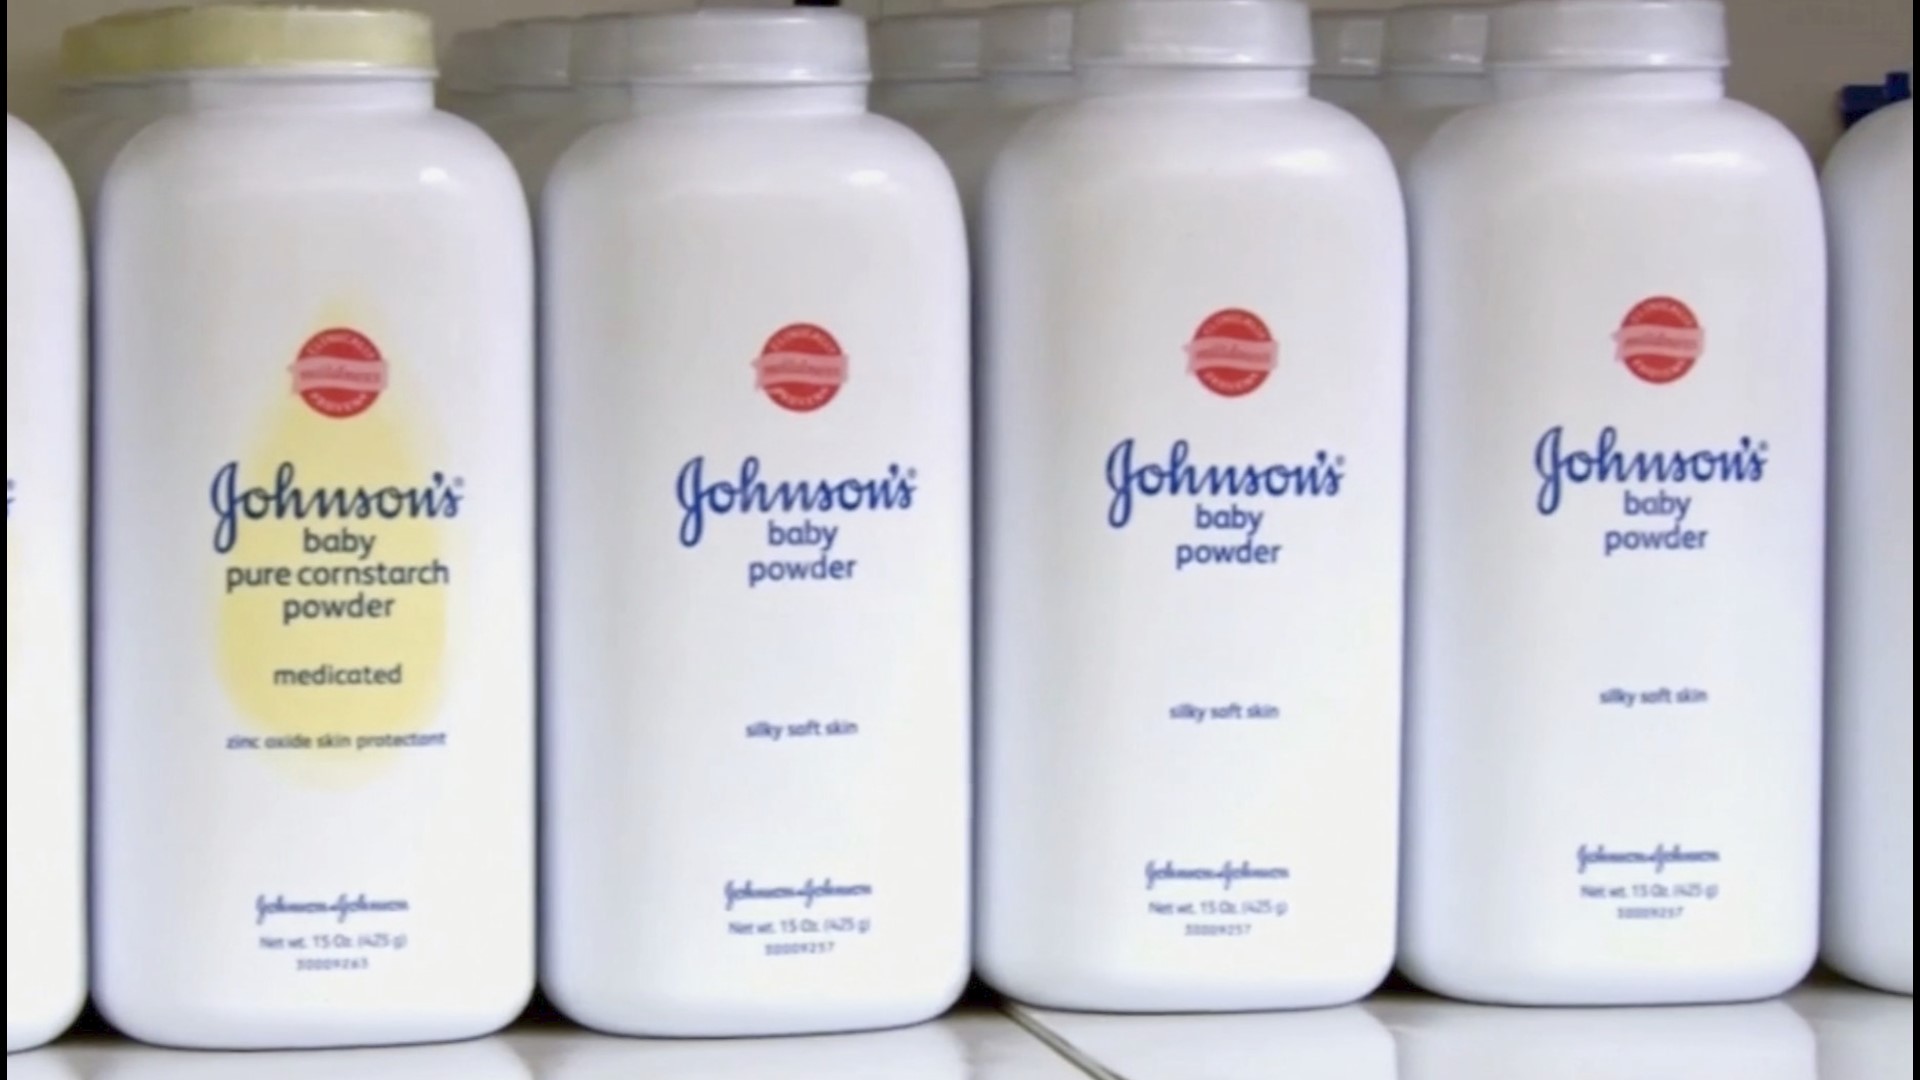 Over concerns that trace amounts of asbestos was discovered in its baby powder, Johnson & Johnson is recalling that product. Veuer's Justin Kircher has more.